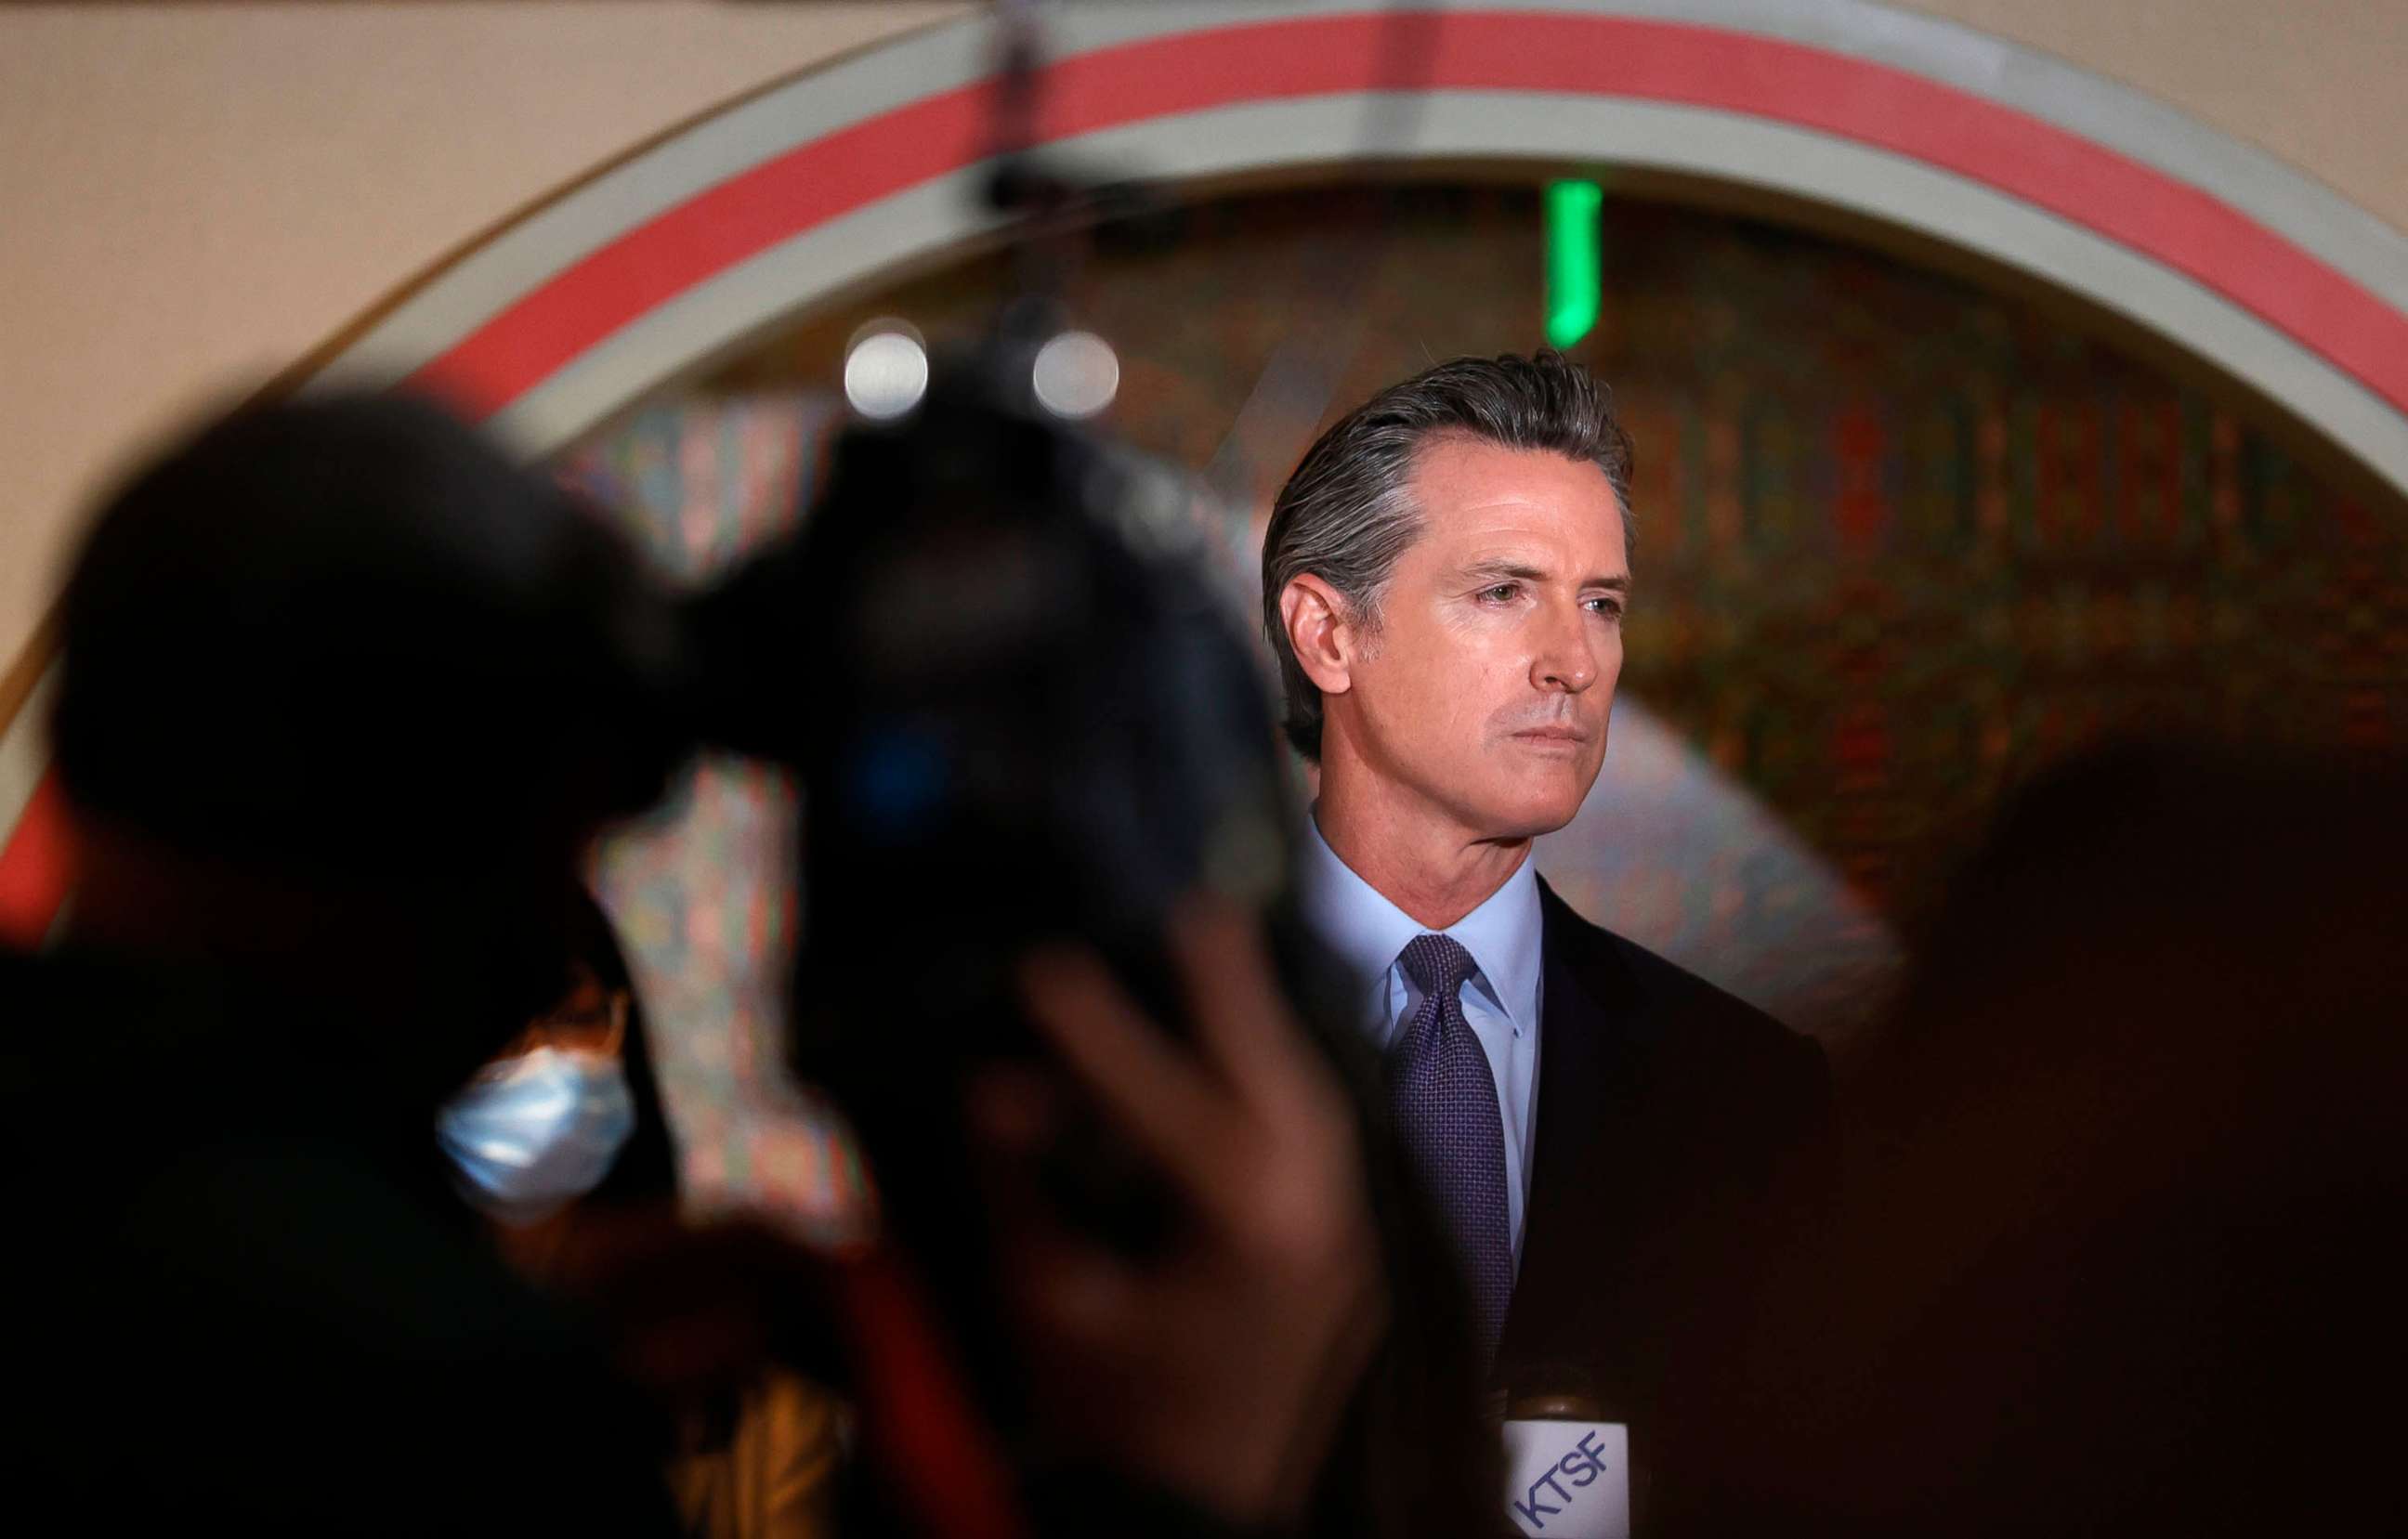 PHOTO: California Gov. Gavin Newsom looks on during a news conference in San Francisco on March 19, 2021.